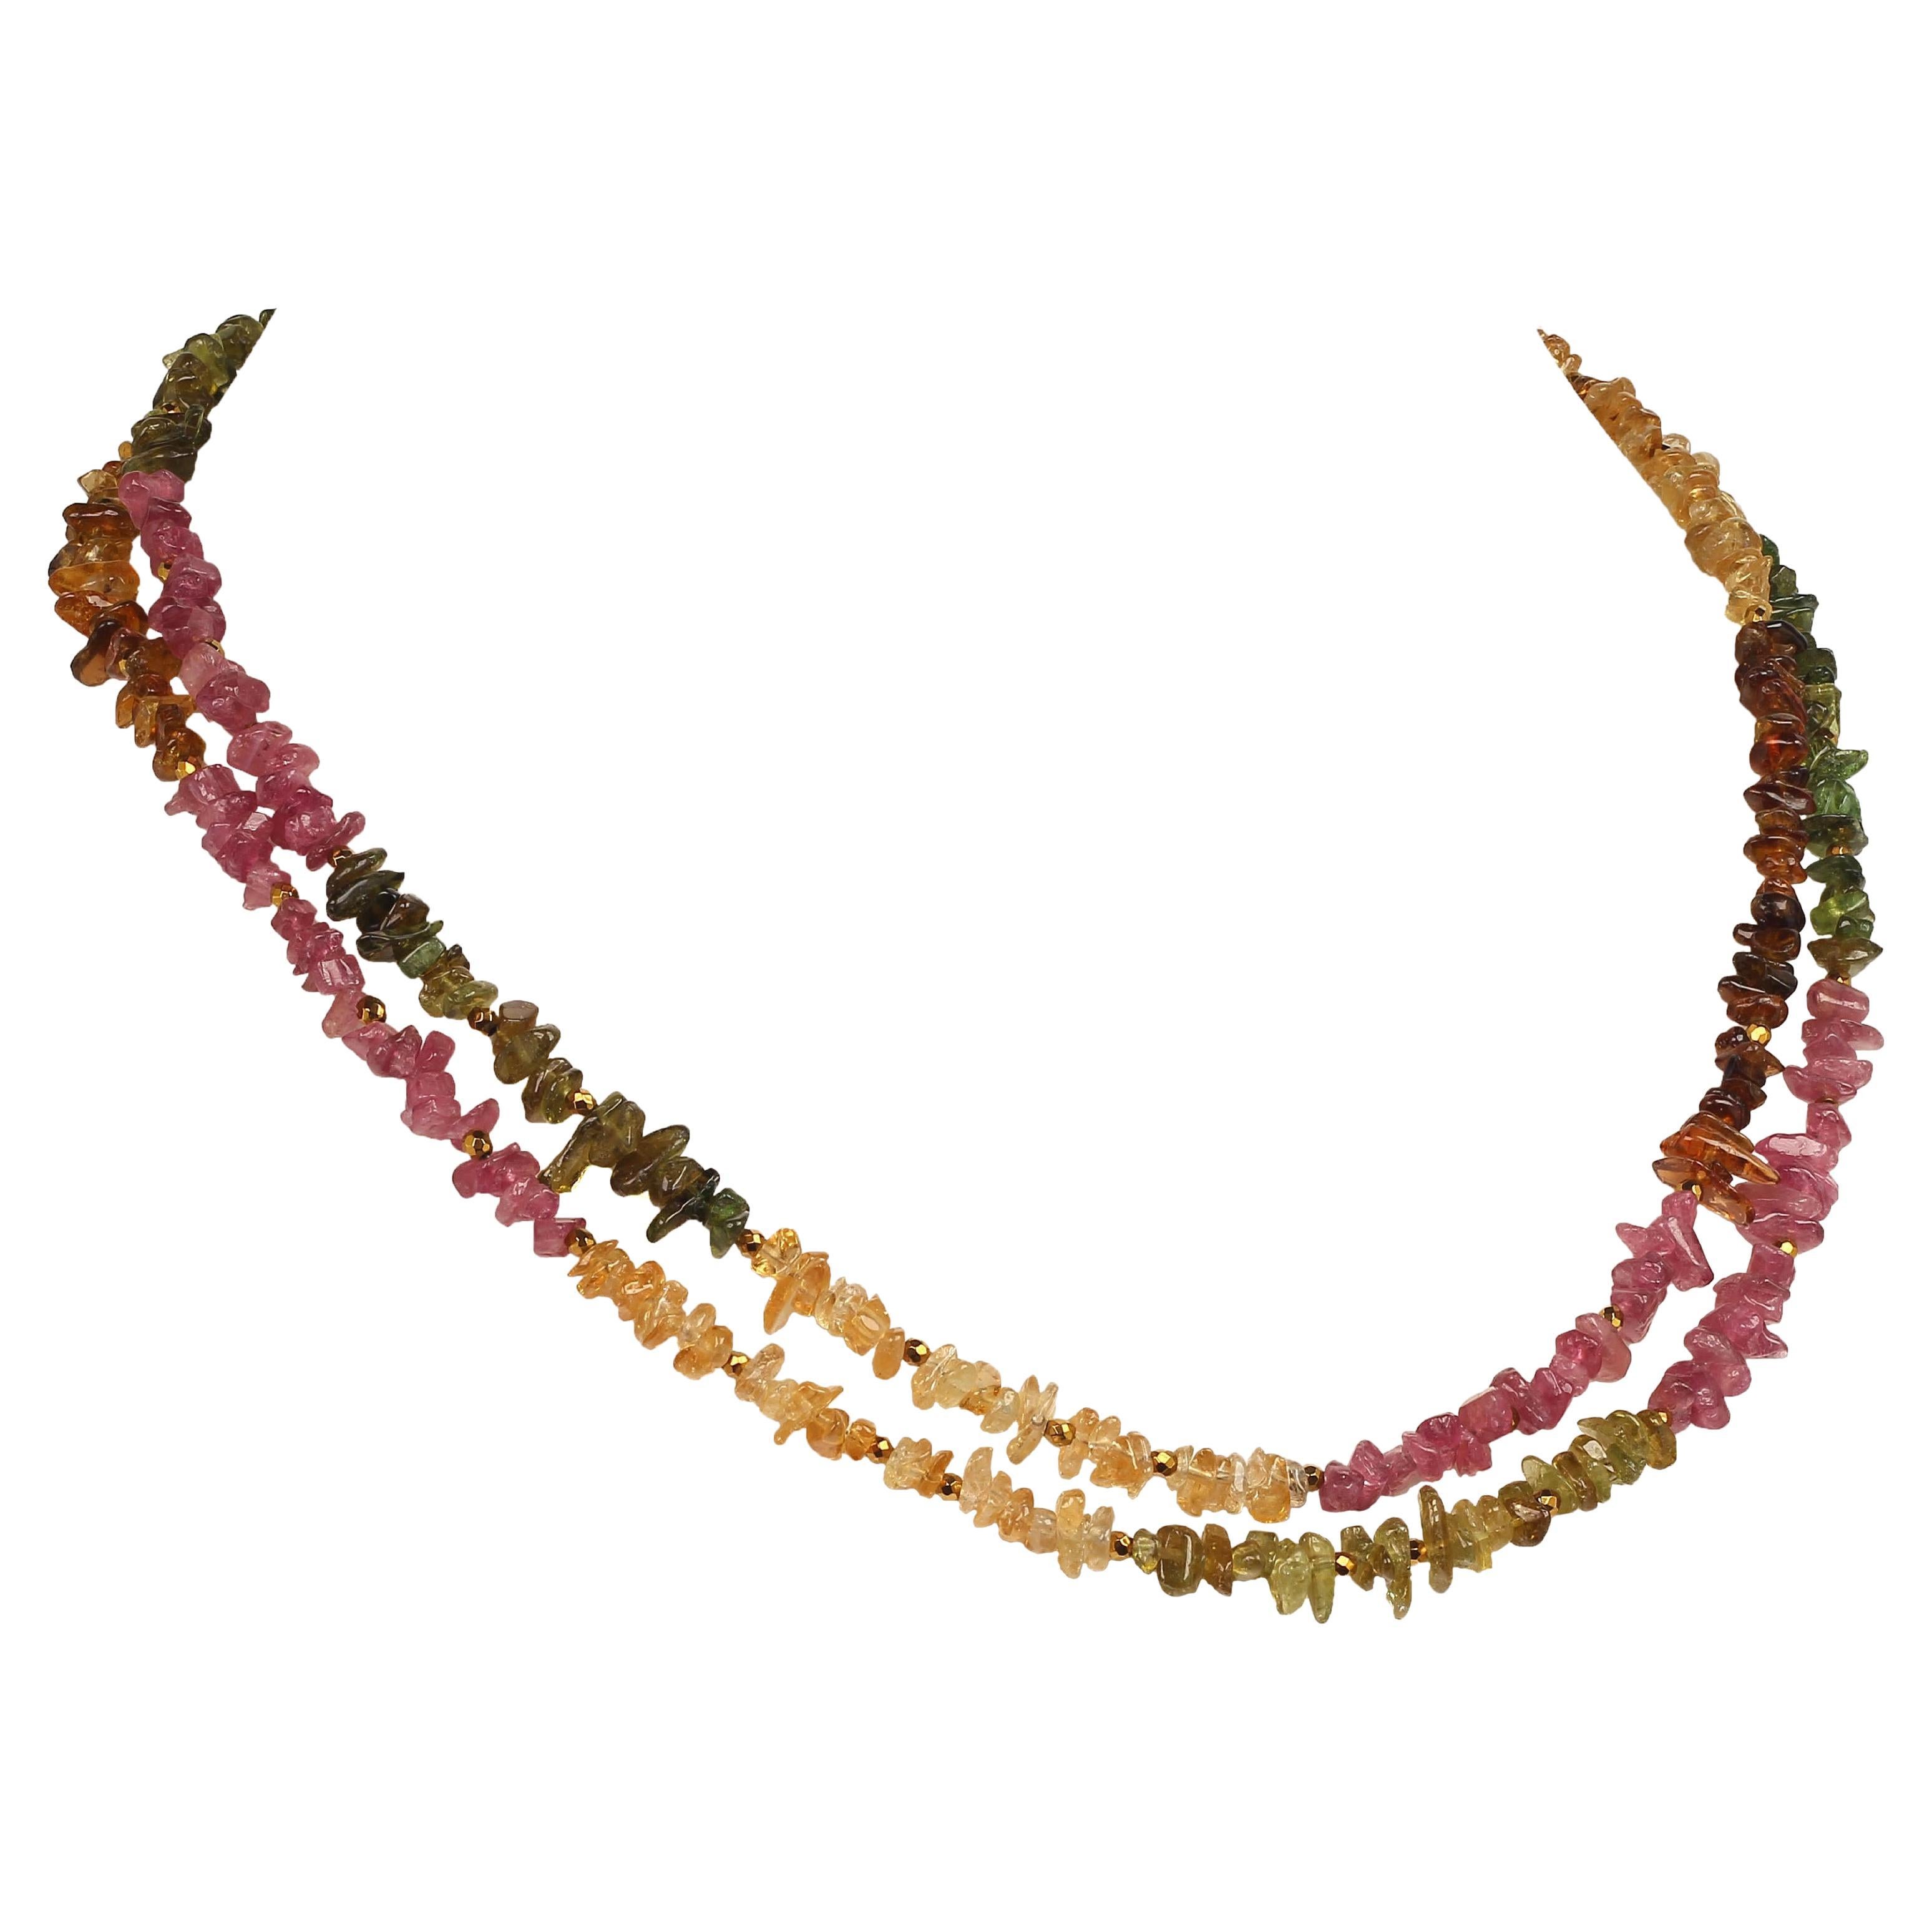 Sparkling Highly Polished Brazilian Gemstone Chip Necklace.  This 37 inch necklace is fabulous for everyday wear as well as evenings out!  Bright, sparkling tourmalines and citrines in glorious colors.  This handmade necklace is secured with a gold 